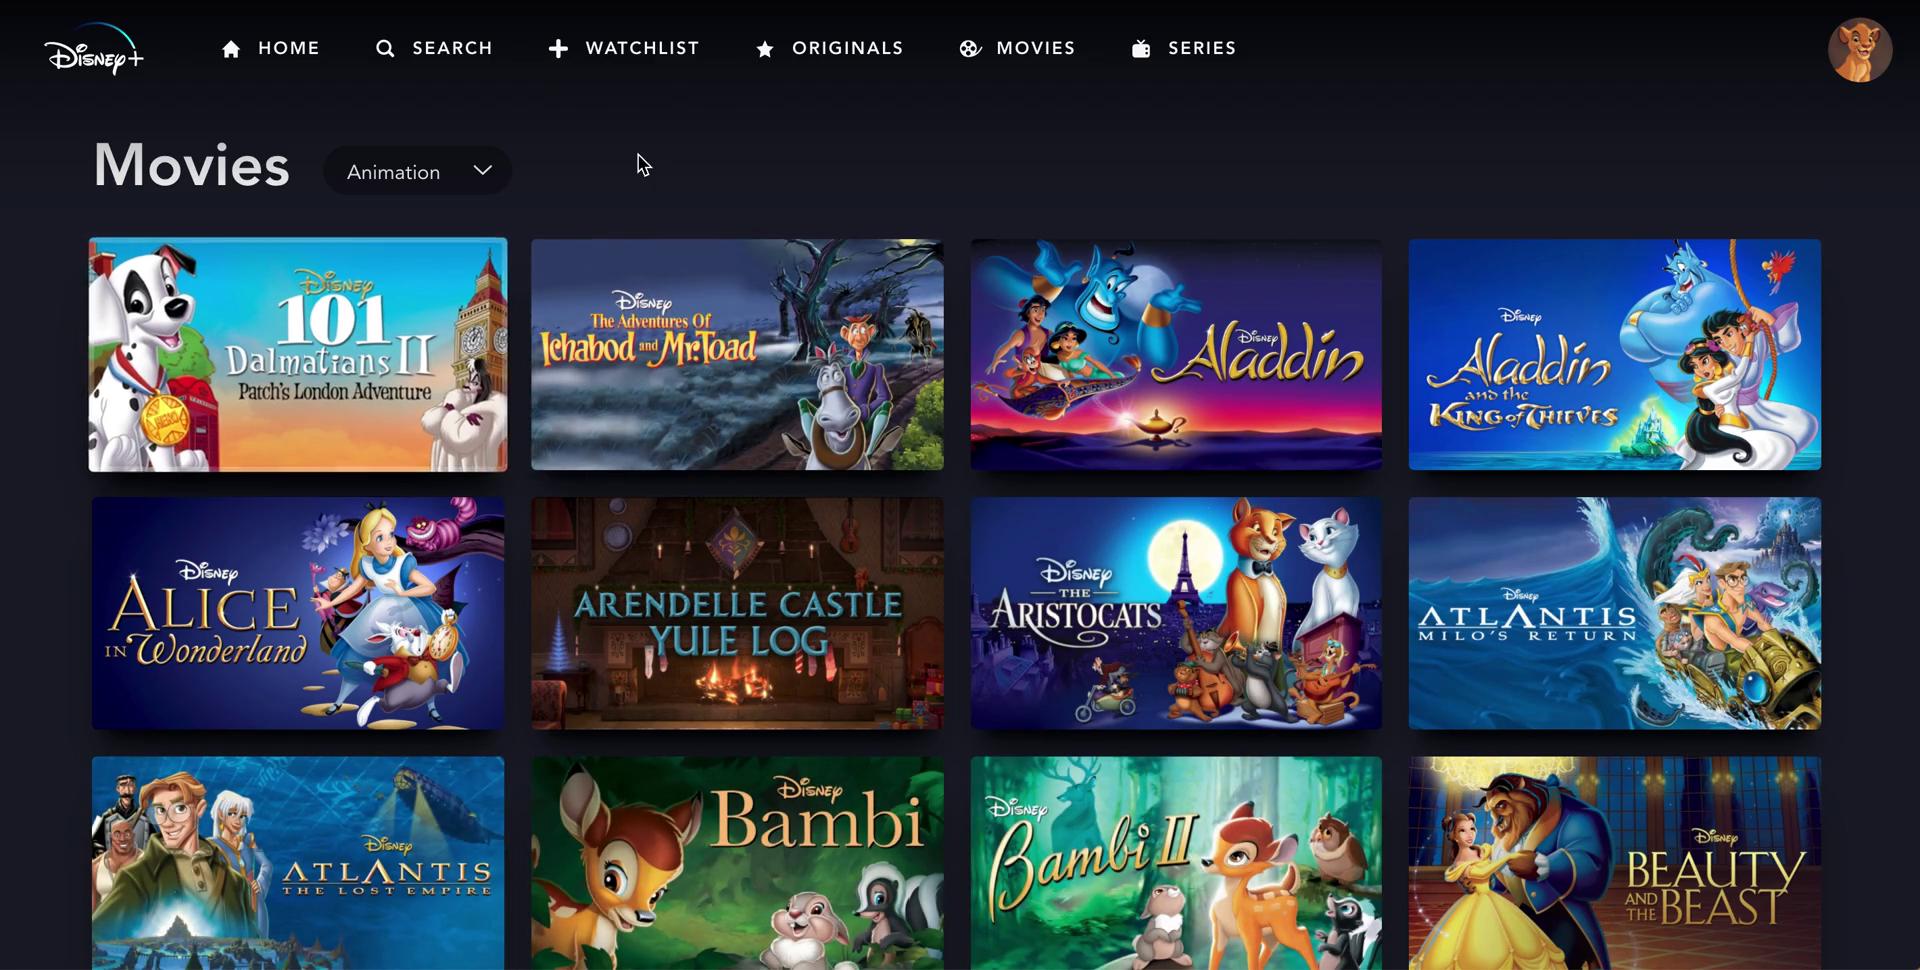 Discovering content on Disney+ (video & 7 screenshots)